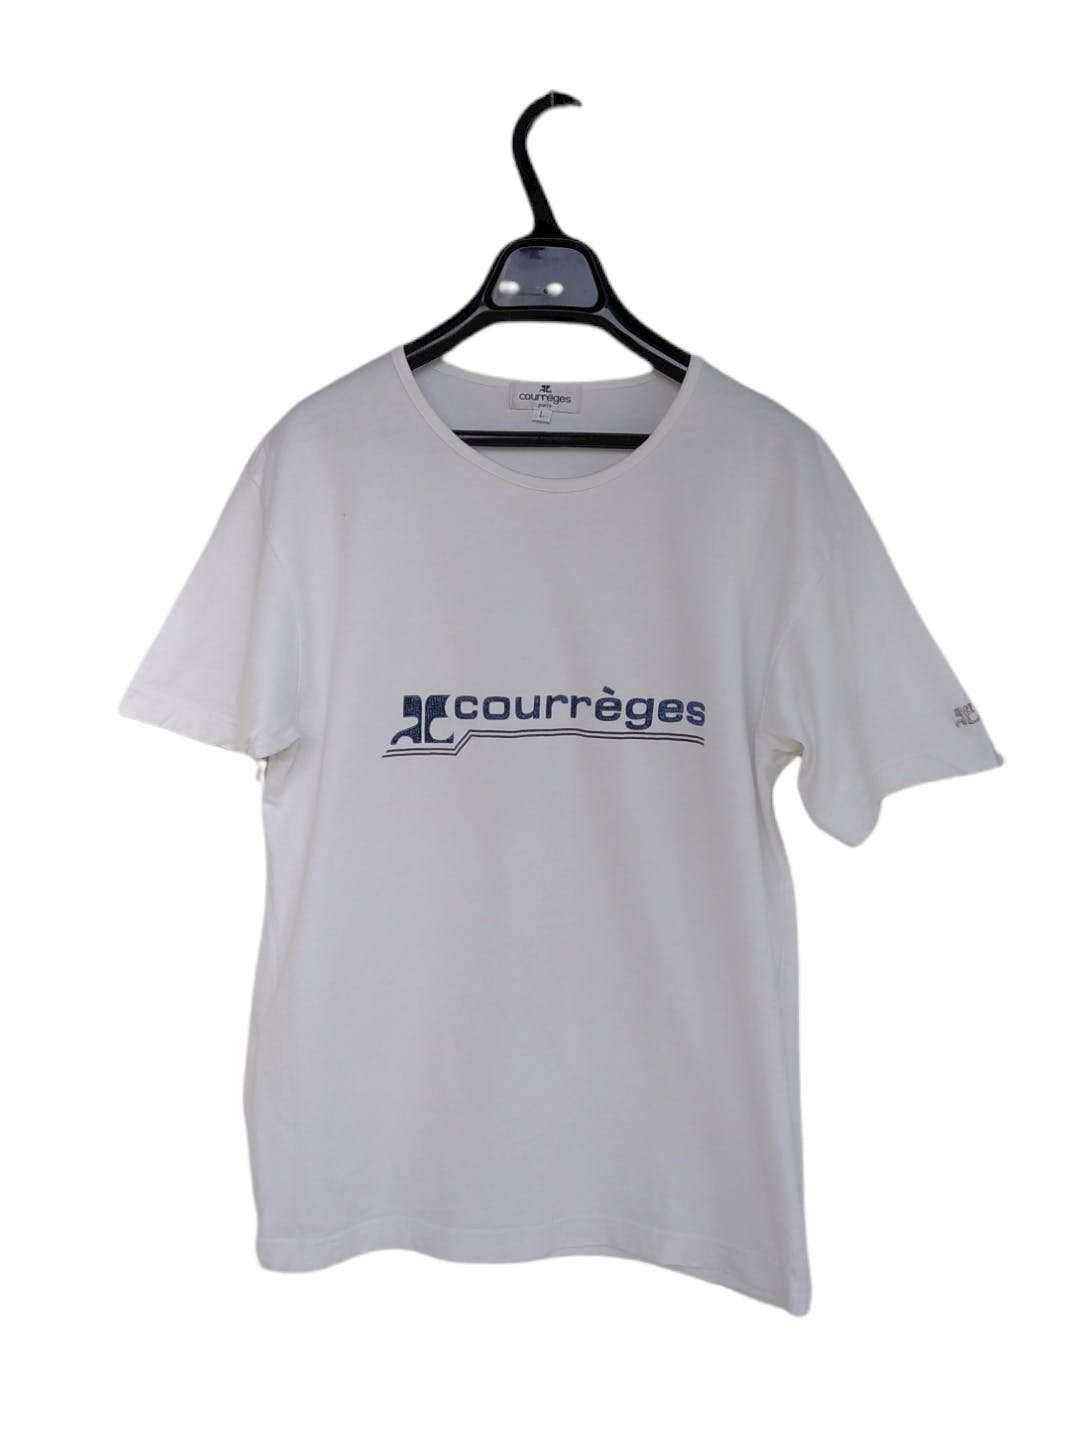 Vintage Courreges Spell Out Logo White Tee - 1